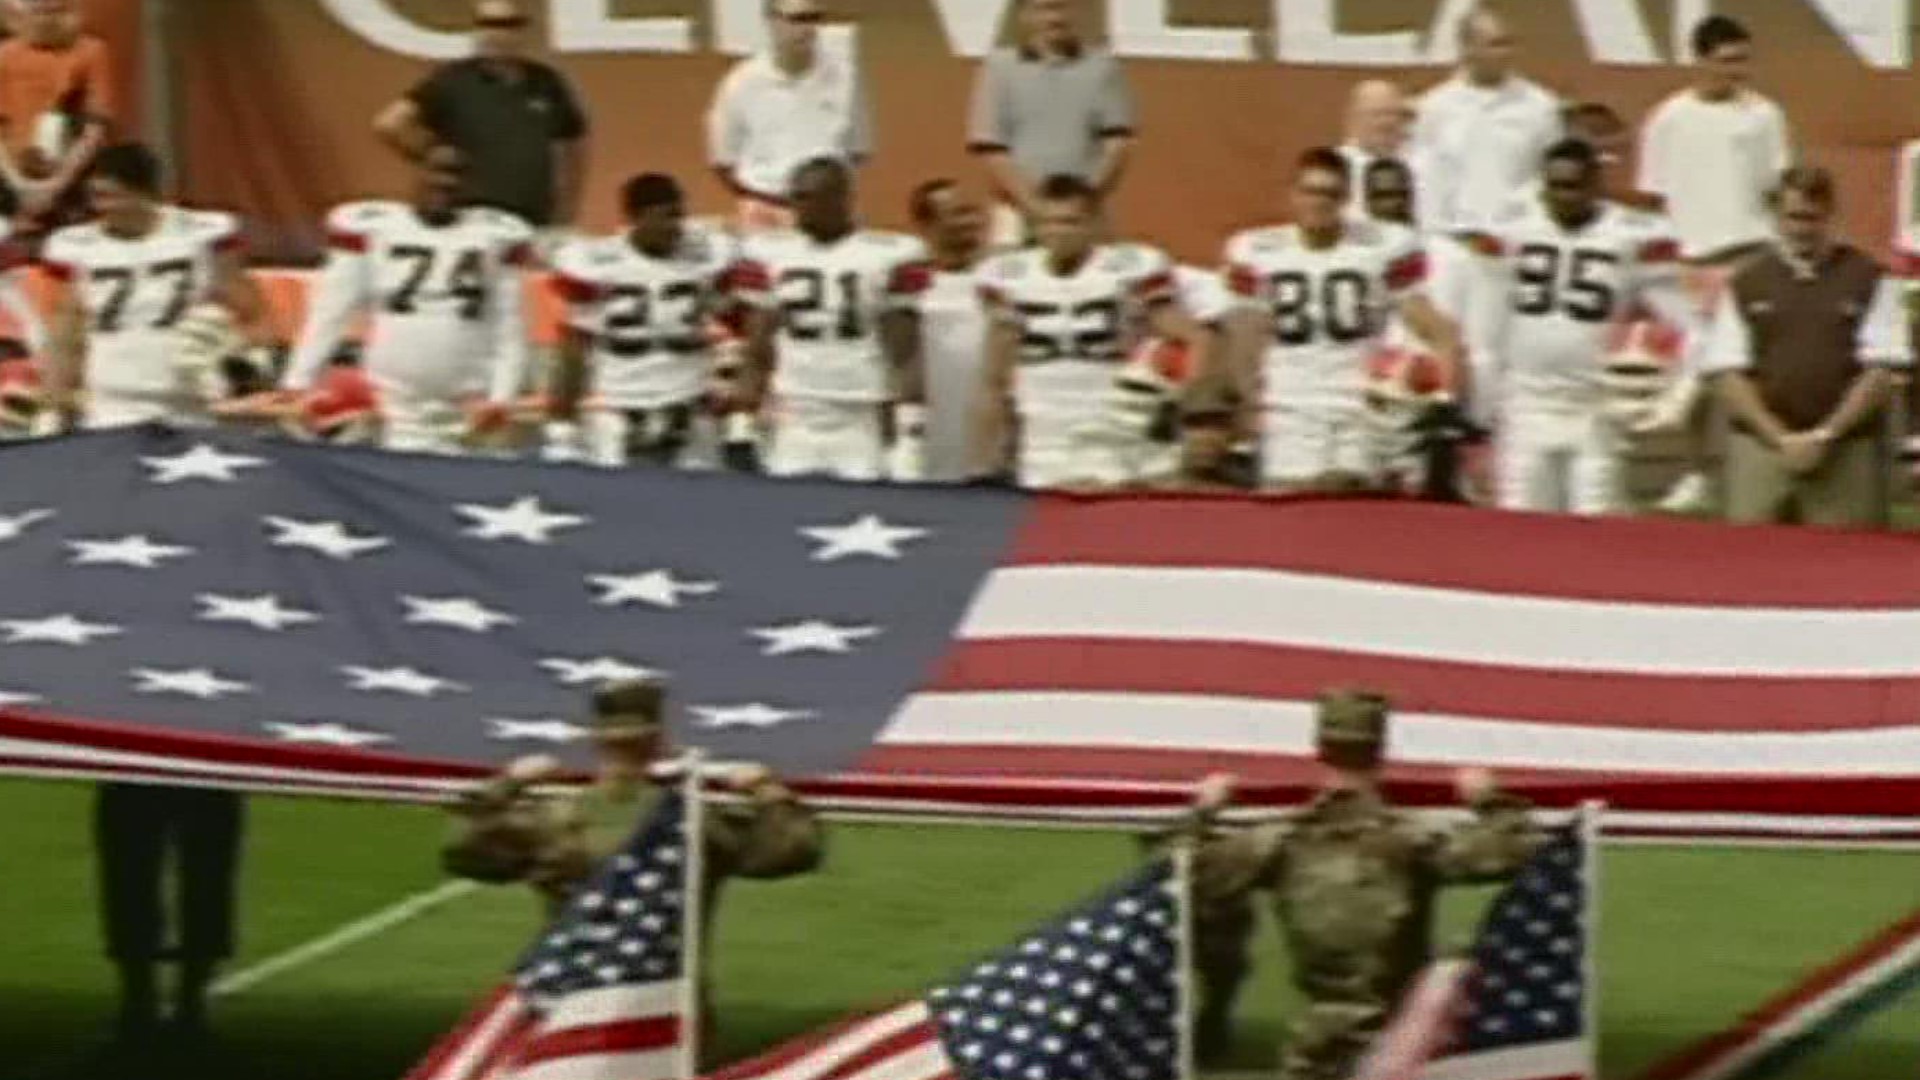 Sports played a big role in the healing process of the nation 20 years ago. Jimmy Donovan, takes a look how the NFL turned to the browns for help.